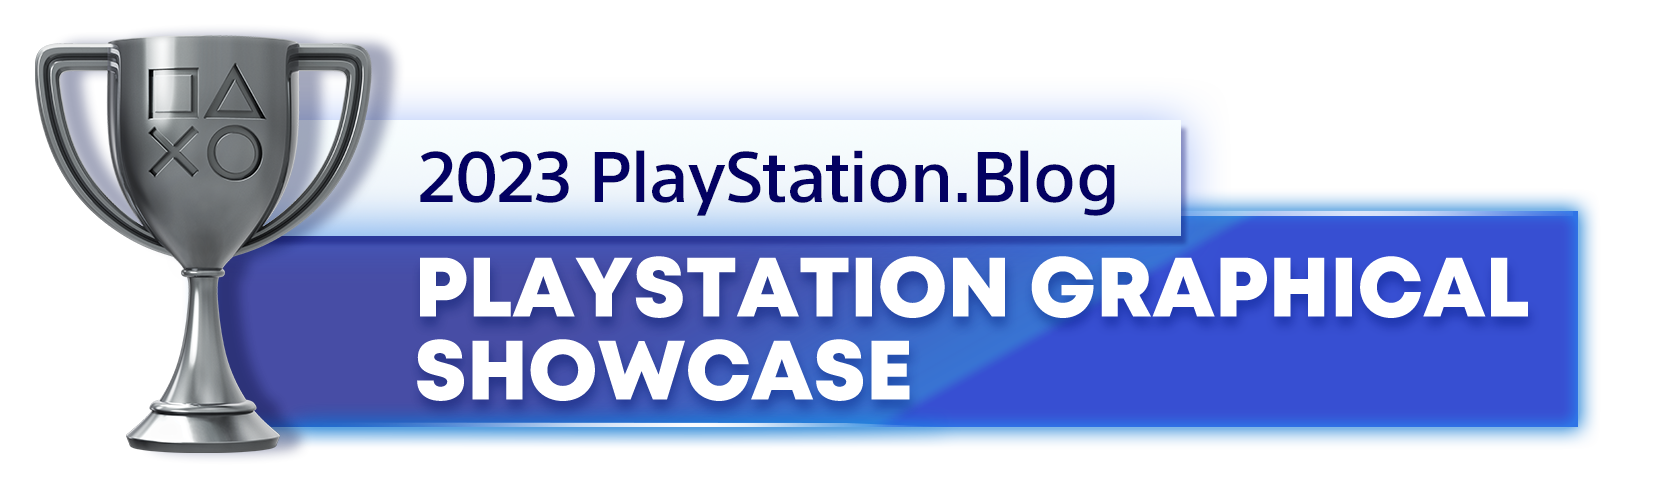  "Silver Trophy for the 2023 PlayStation Blog PlayStation Best Graphical Showcase Winner"